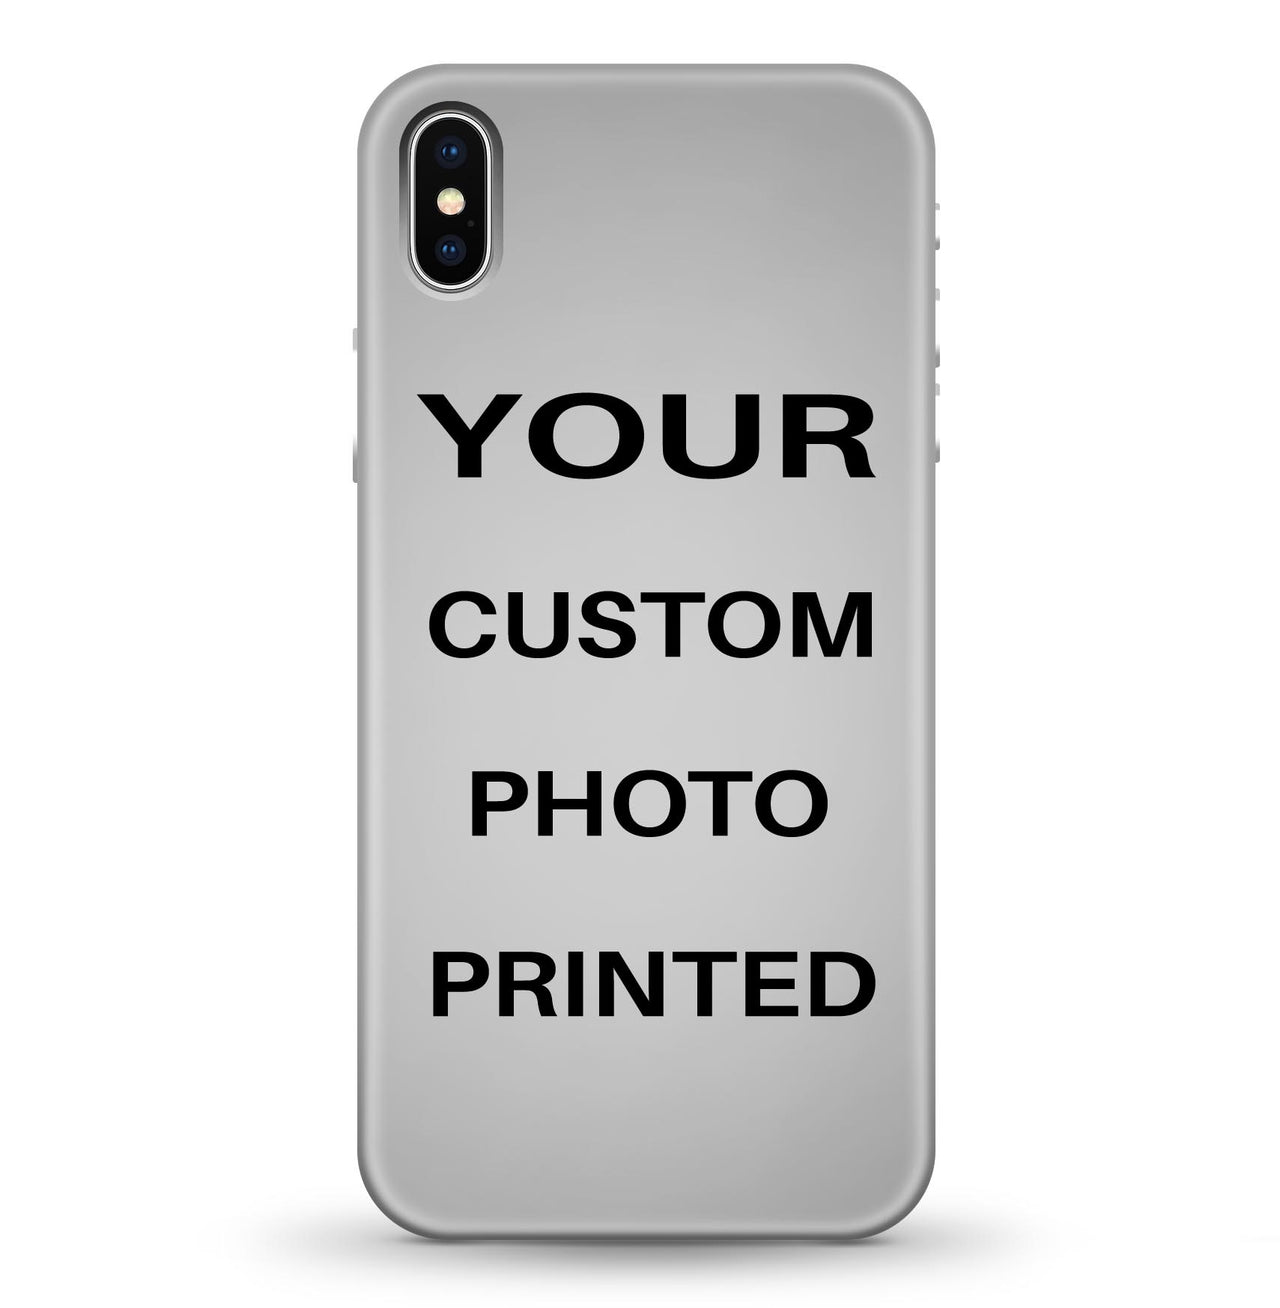 Your Custom Image / Photo Printed iPhone Cases